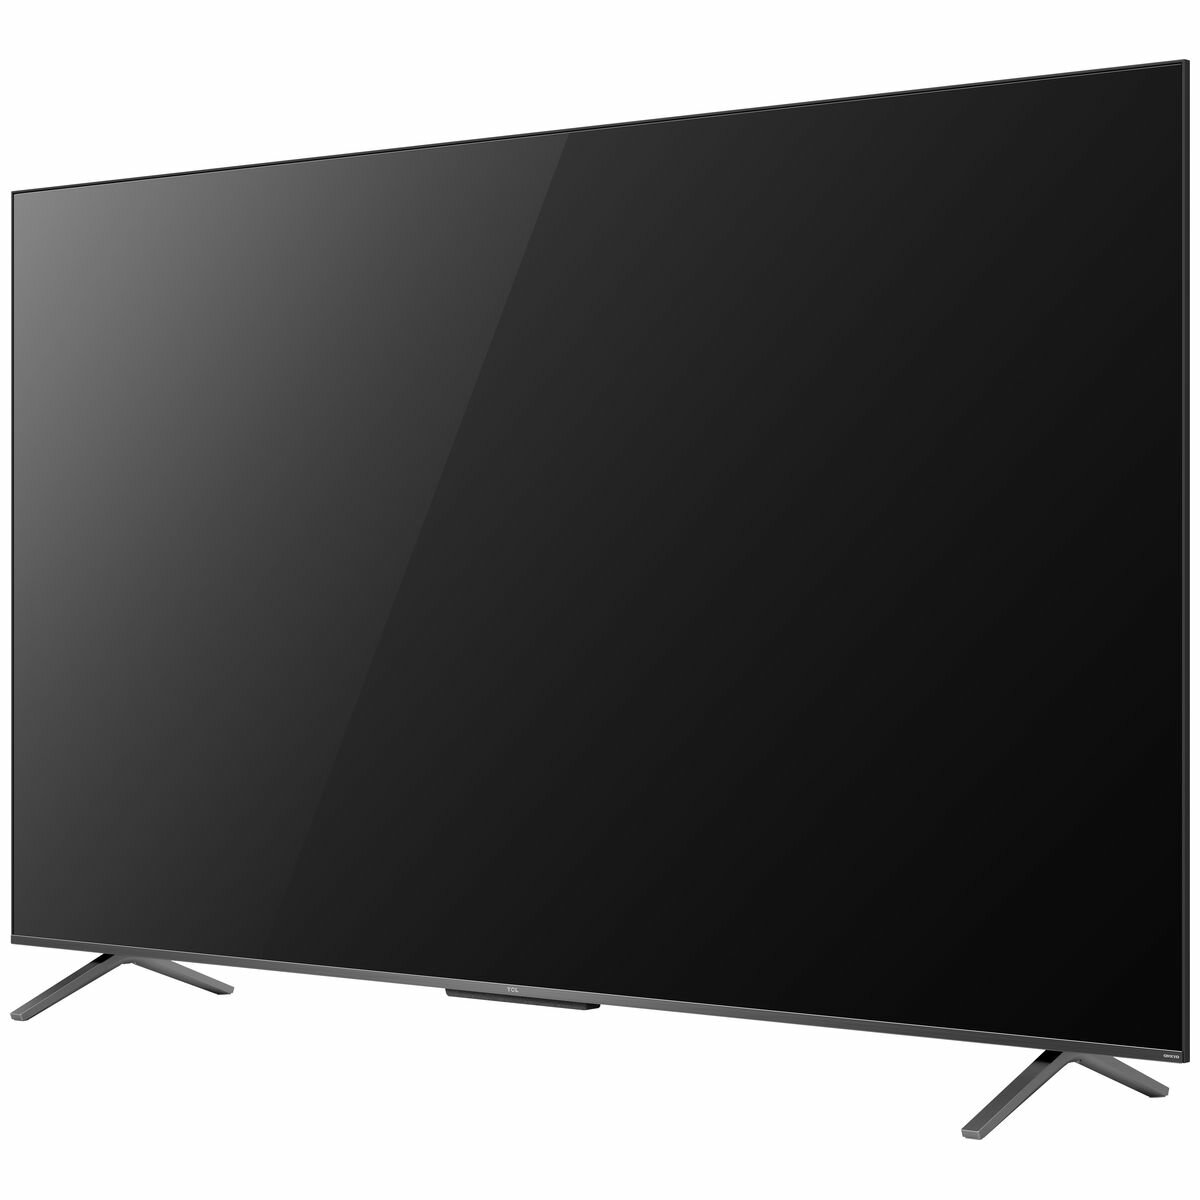 tcl-55-inch-p725-4k-uhd-hdr-smart-android-tv-55p725-3-9f51bc41-high